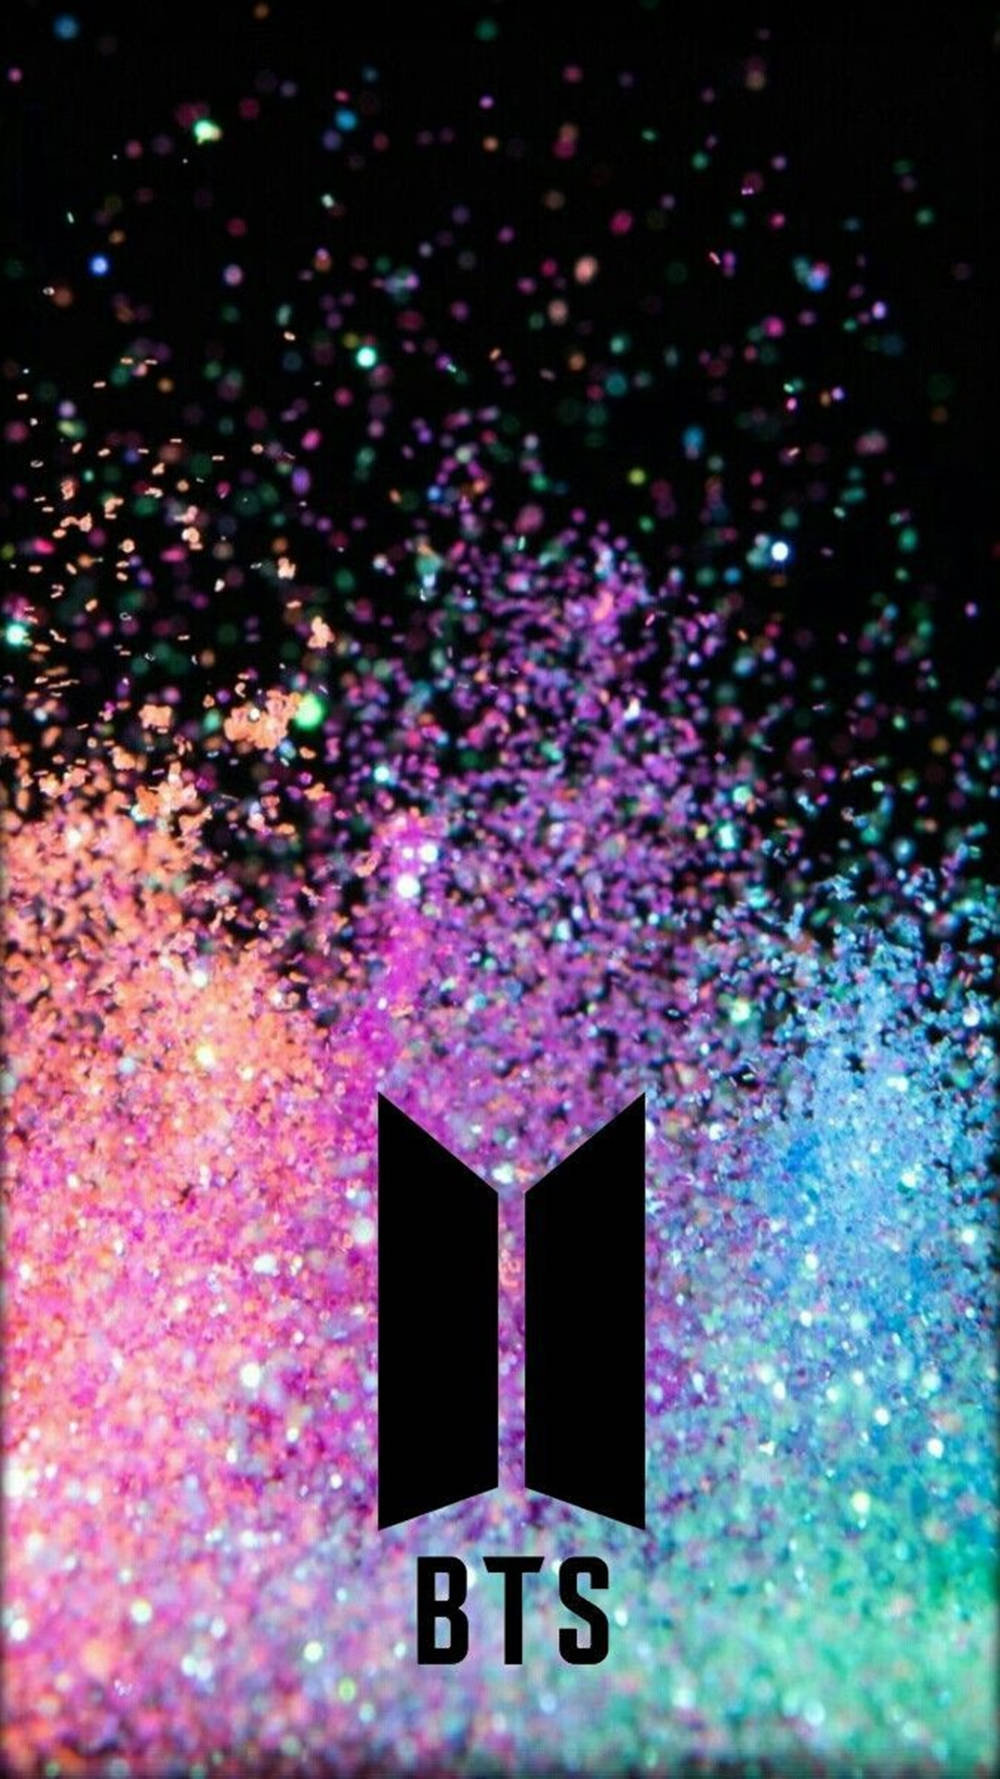 Stylish Poster For Bts Phone